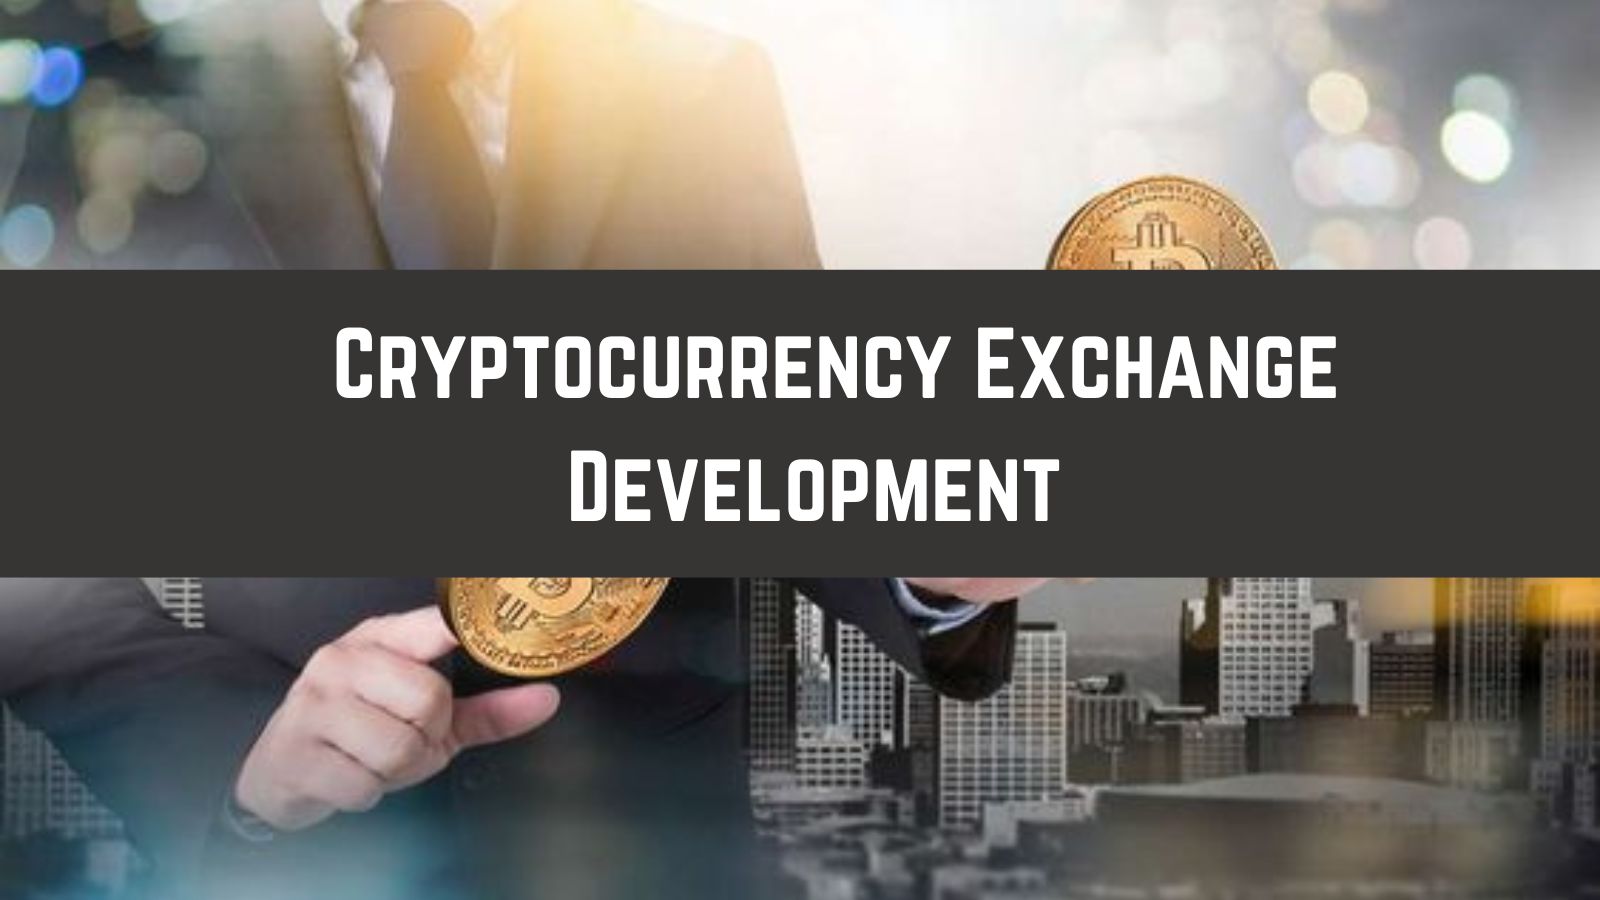 What Are The Important Factors In Crypto Exchange?